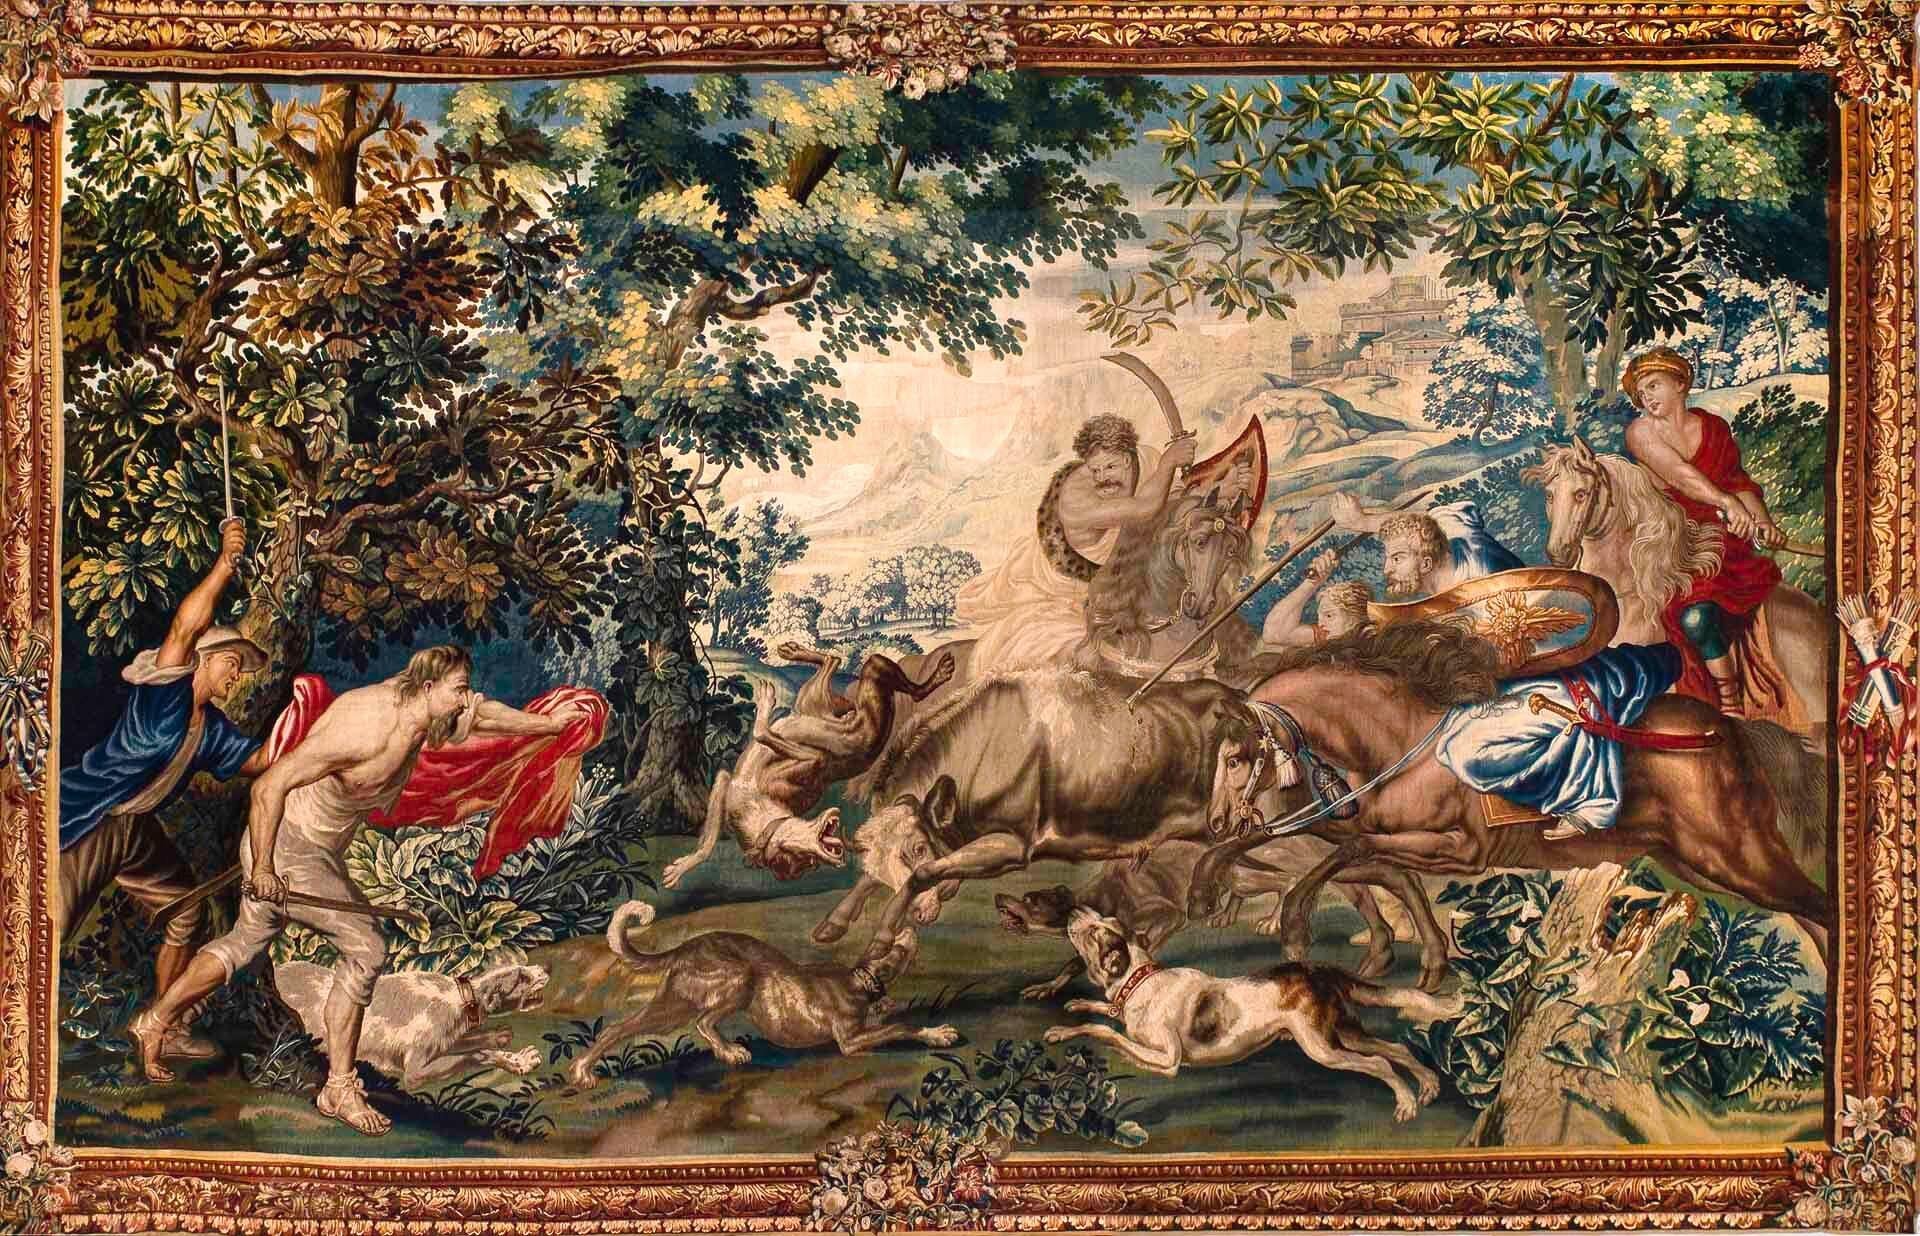 outstanding tapestry in wool and silk, Bruxelles, second half of the 17th century.
Depicting a detailed scene of The Bull Hunting. On the background of the landscape the Monument of Castle Sant' Angelo, reference of the Roman commission. Exceptional